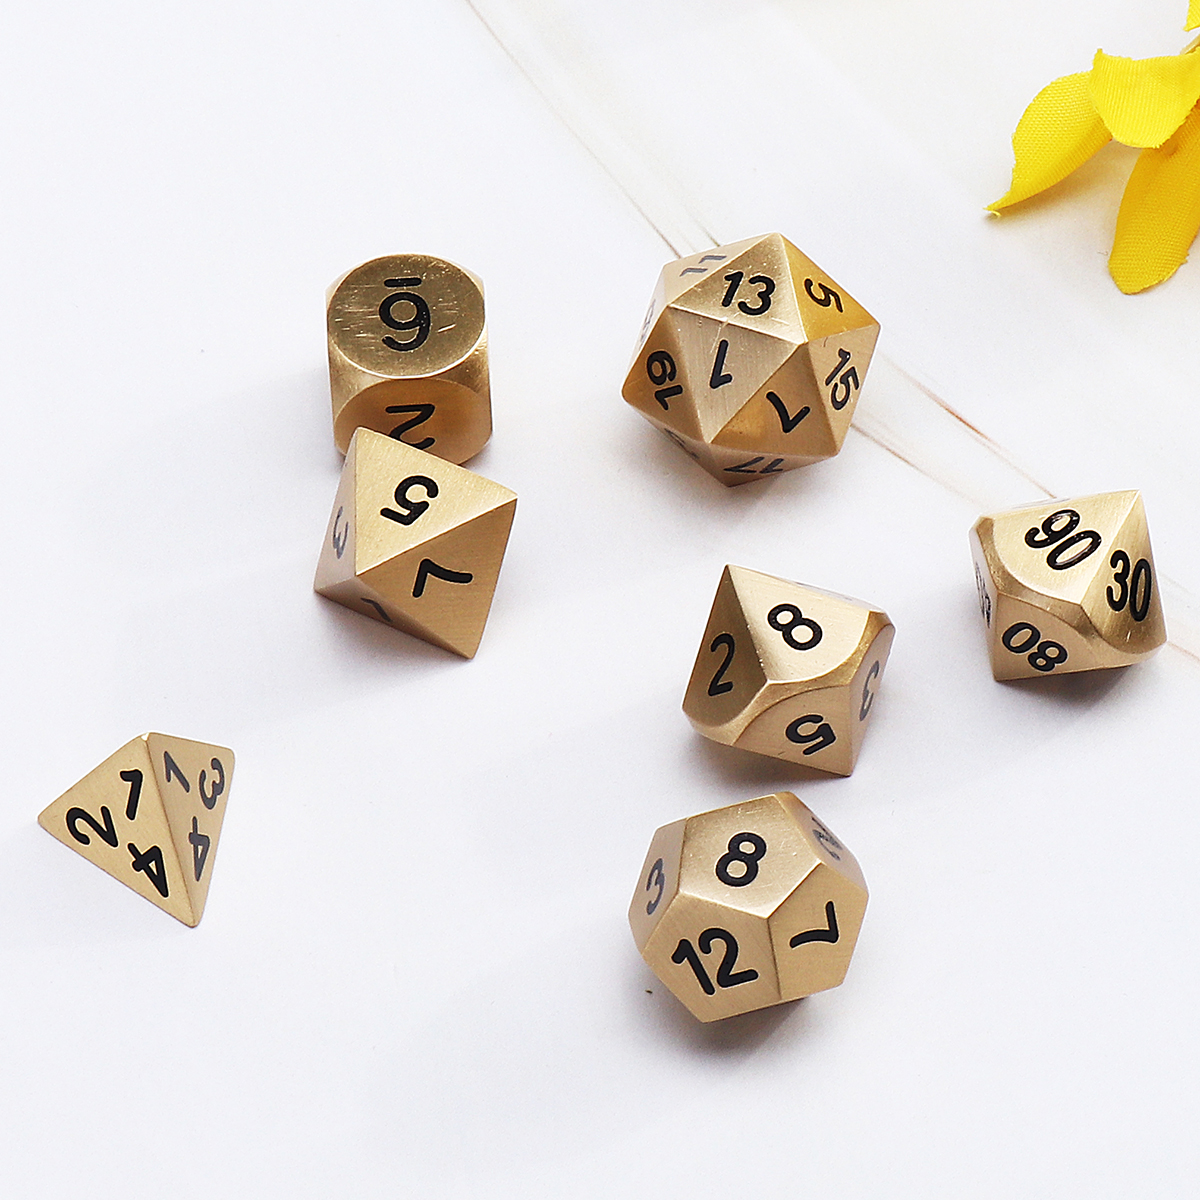 Pure-Copper-Polyhedral-Dices-Set-Metal-Role-Playing-Game-Dice-Gadget-for-Dungeons-Dragon-Games-Gift-1608120-6